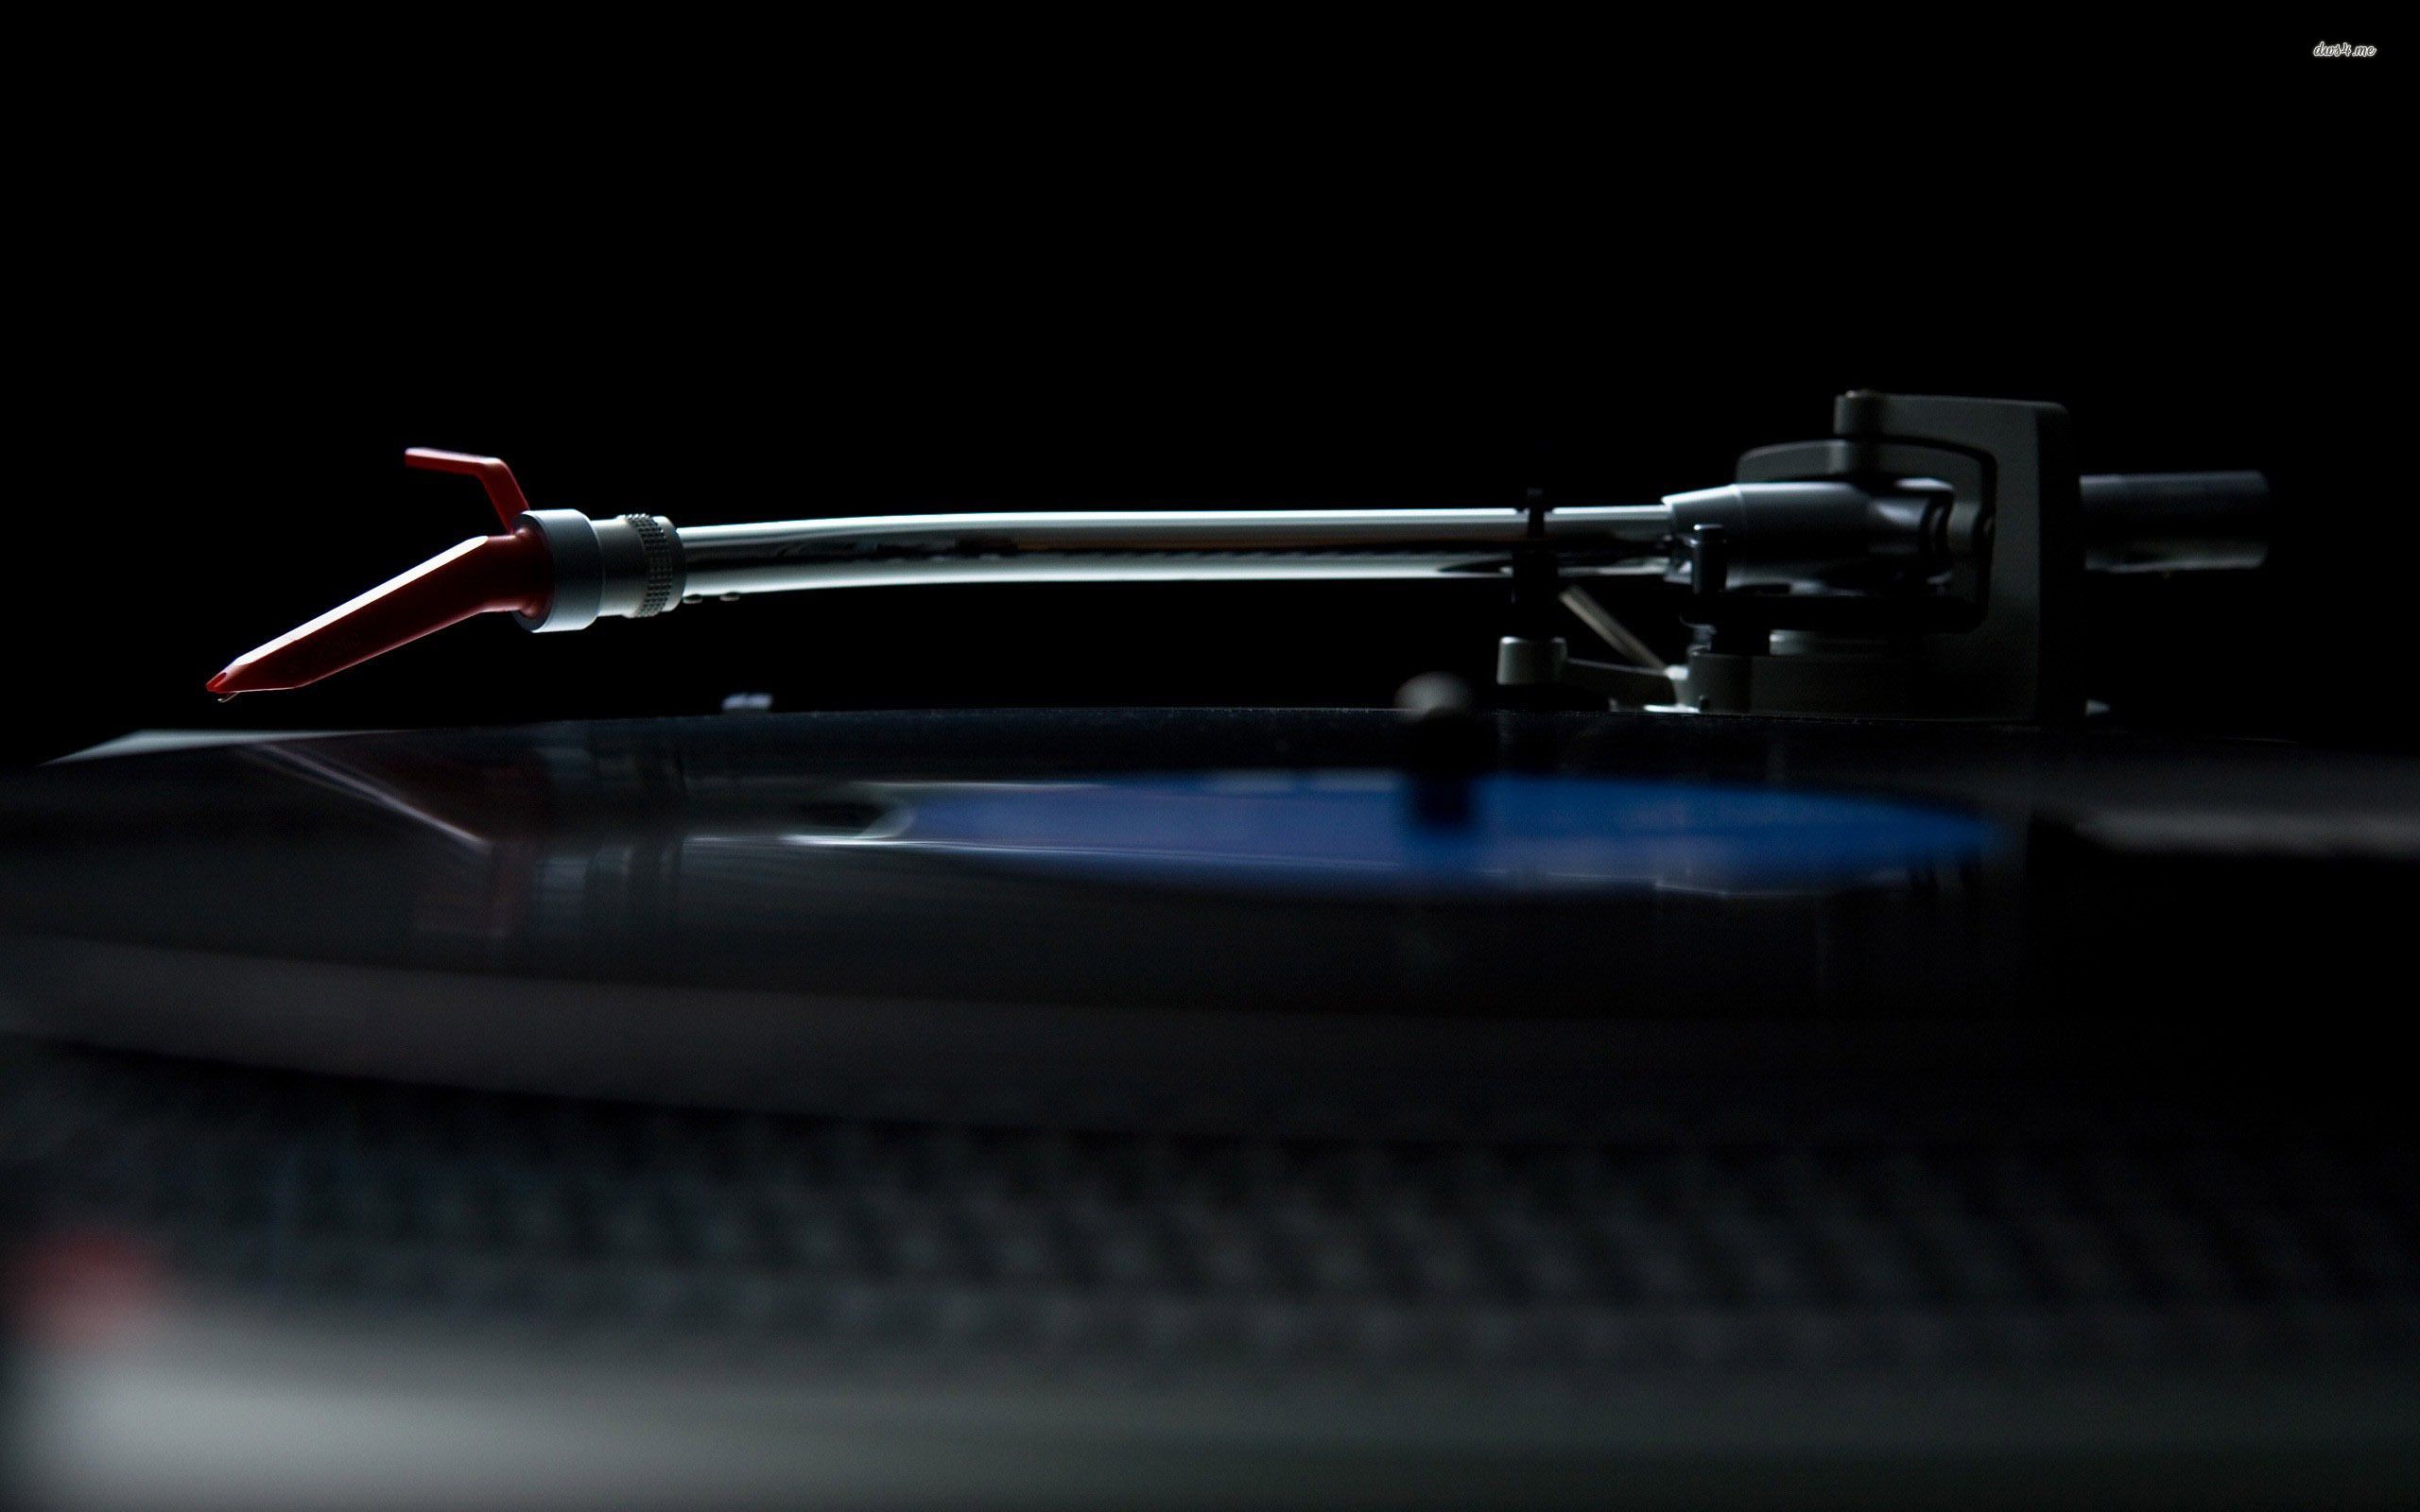 Turntable wallpaper - Music wallpapers - #17338